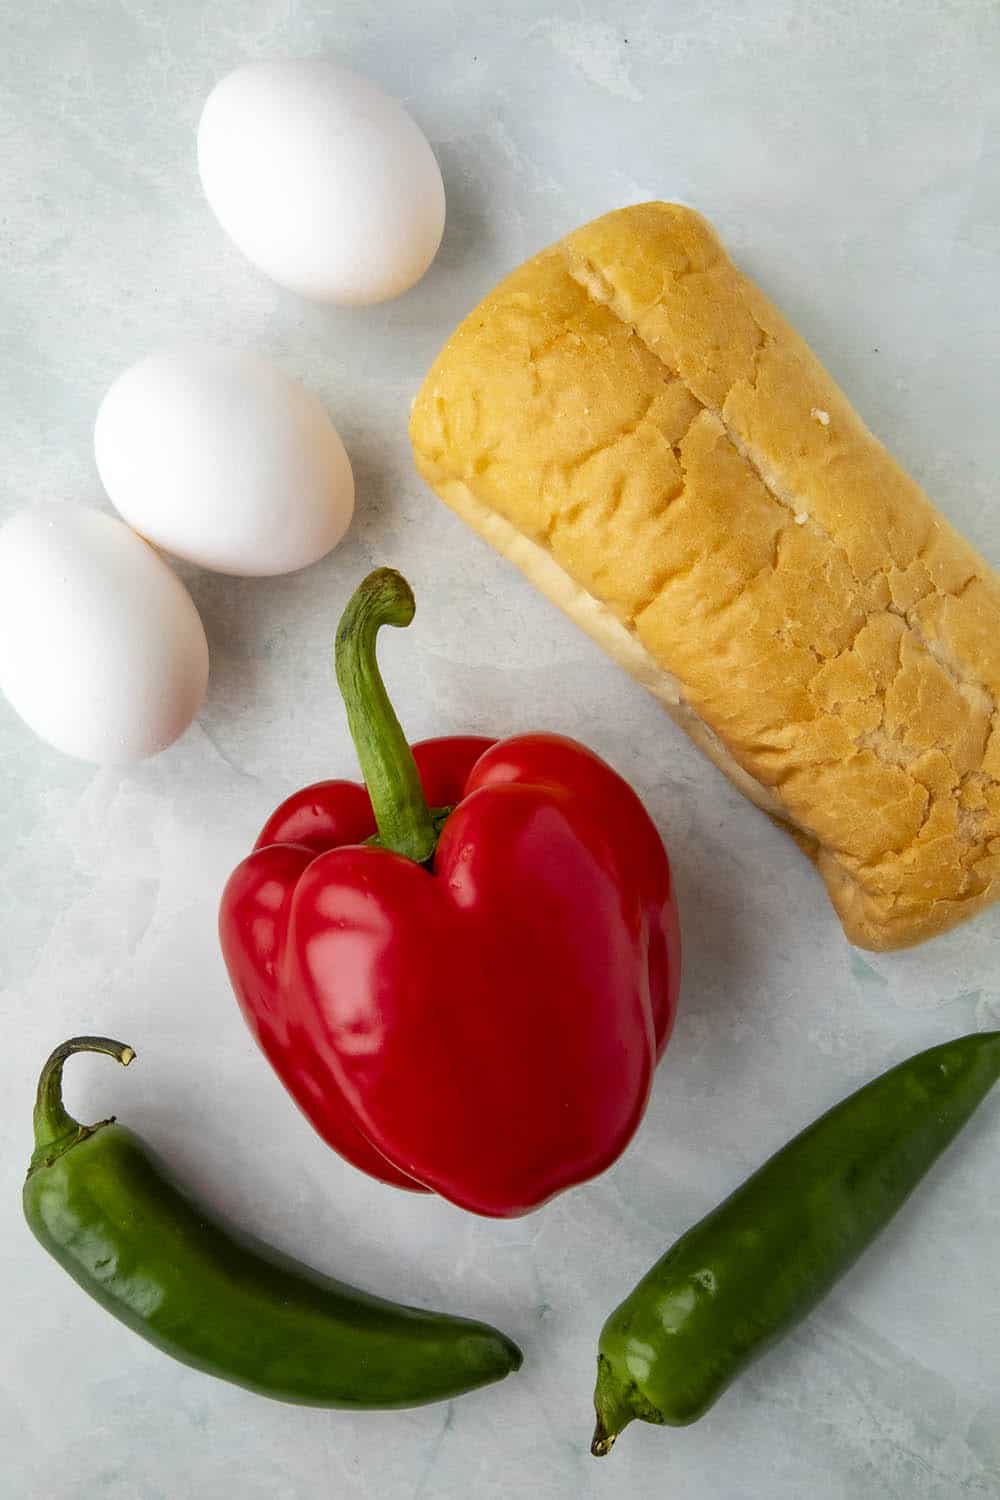 Pepper and Egg Sandwich ingredients